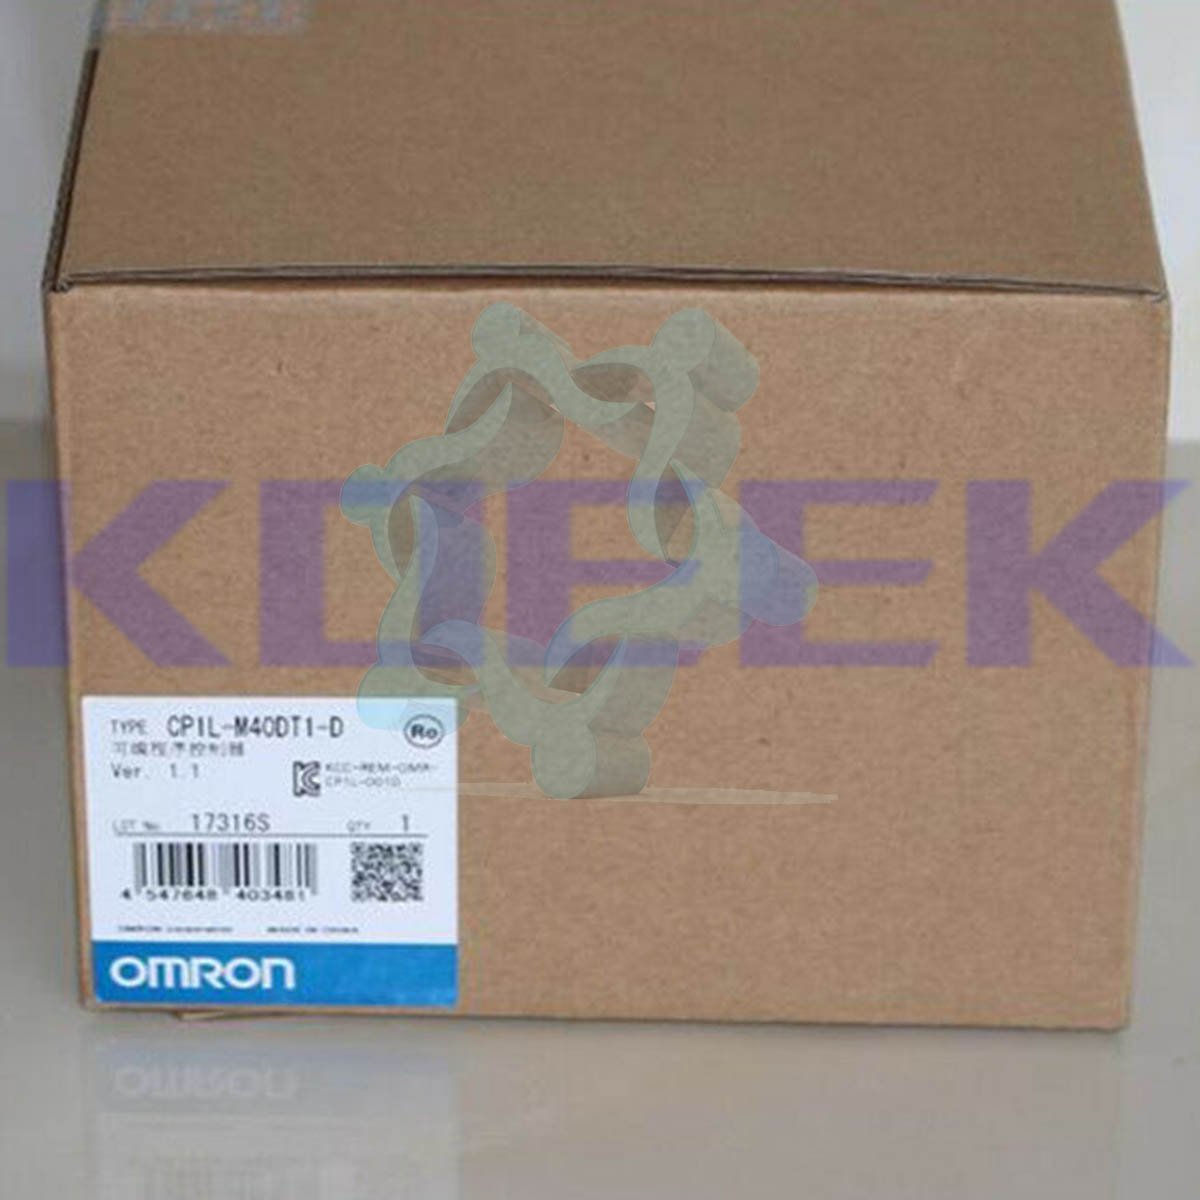 CP1L-M40DT1-D KOEED 201-500, 80%, import_2020_10_10_031751, Omron, Other